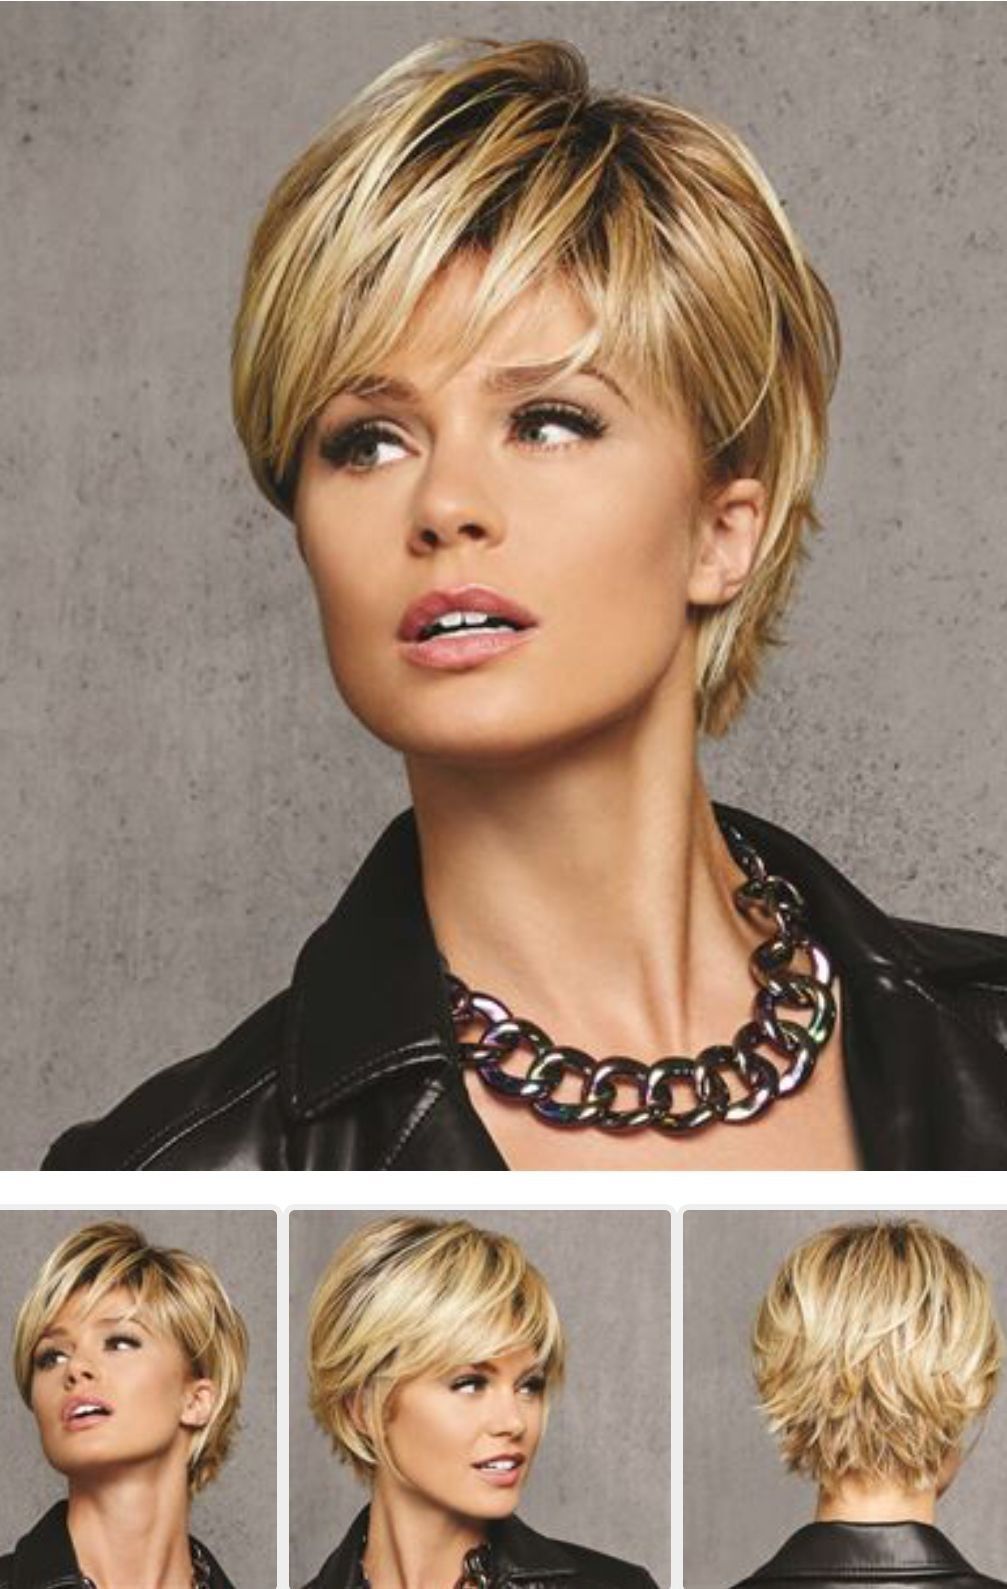 Women Hairstyles With Bangs Popular Haircuts -   Fine Hair Style Short Hair Cuts for Women Over 50